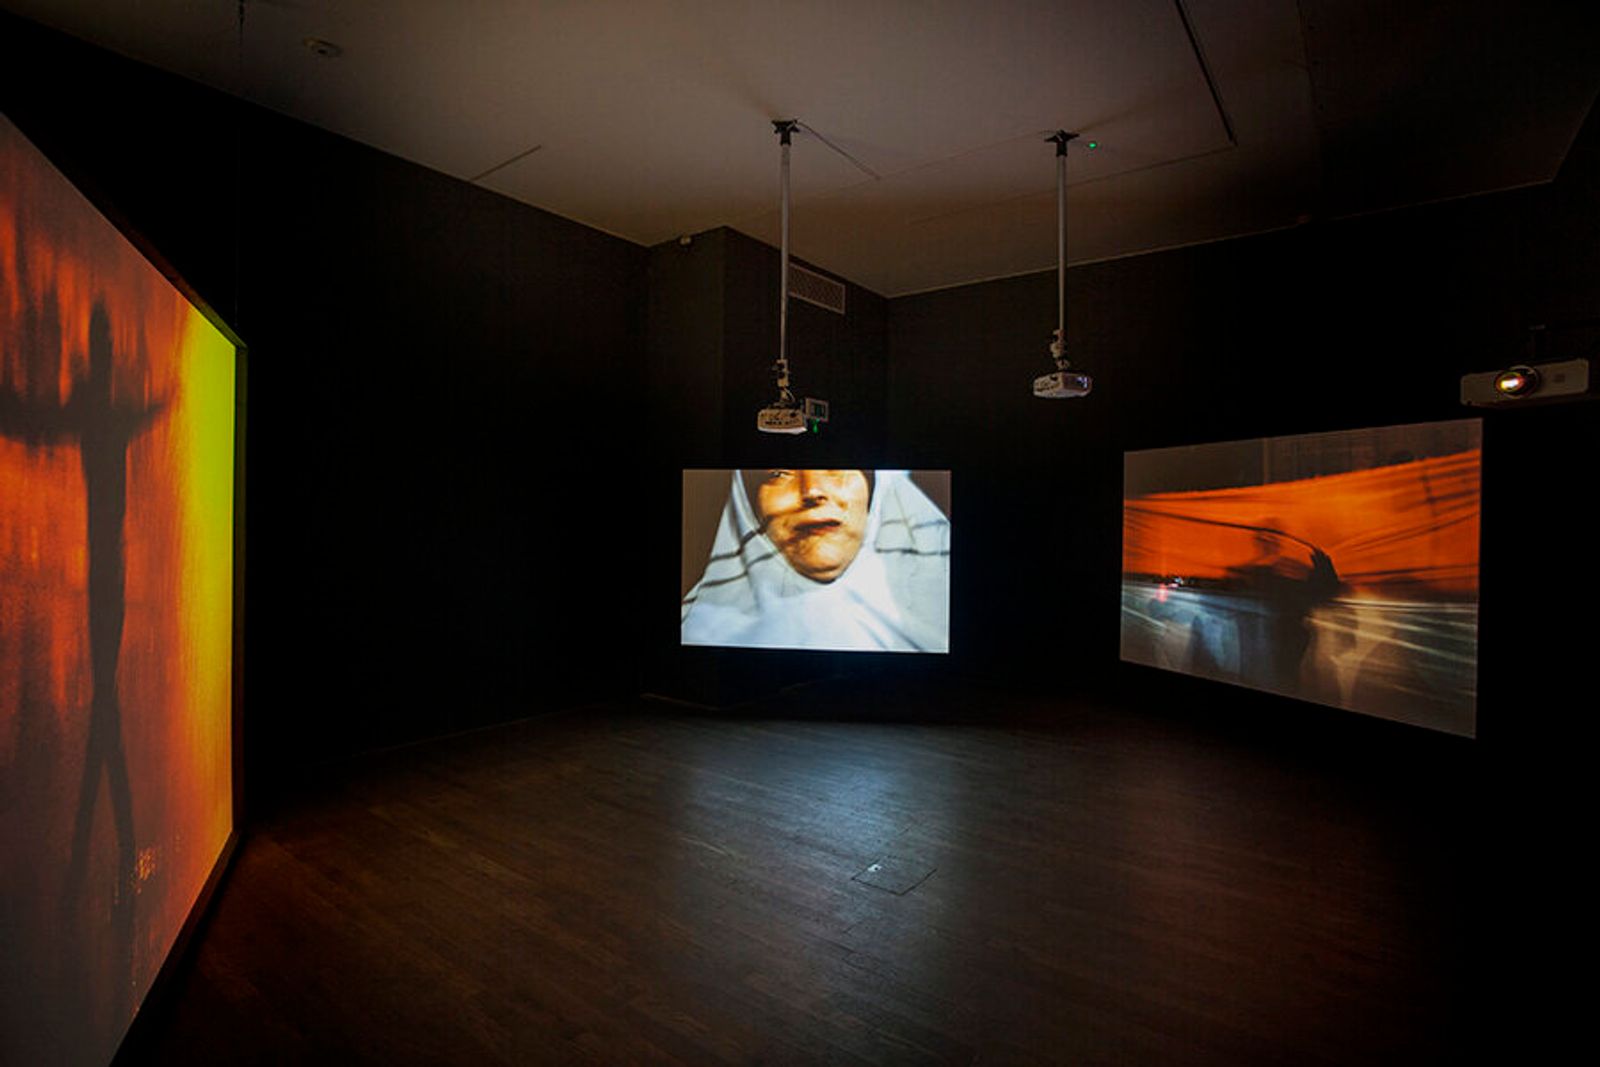 © Laura El-Tantawy, multi-channels video installation at The Photographers' Gallery for the Deutsche Börse Prize.